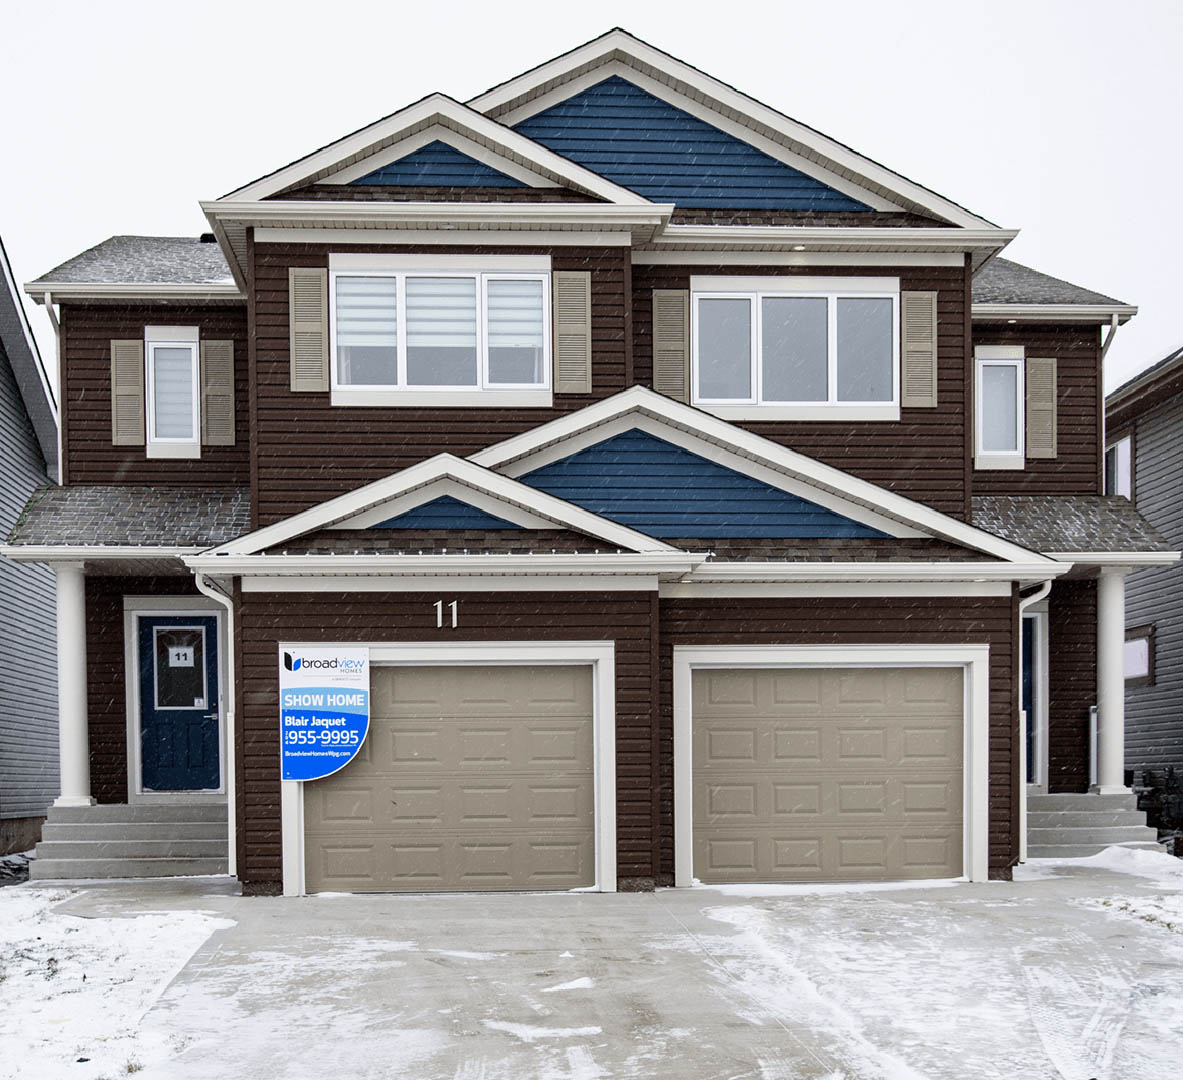 5 Reasons to Buy a New Home in the Winter Duplex Showhome Image